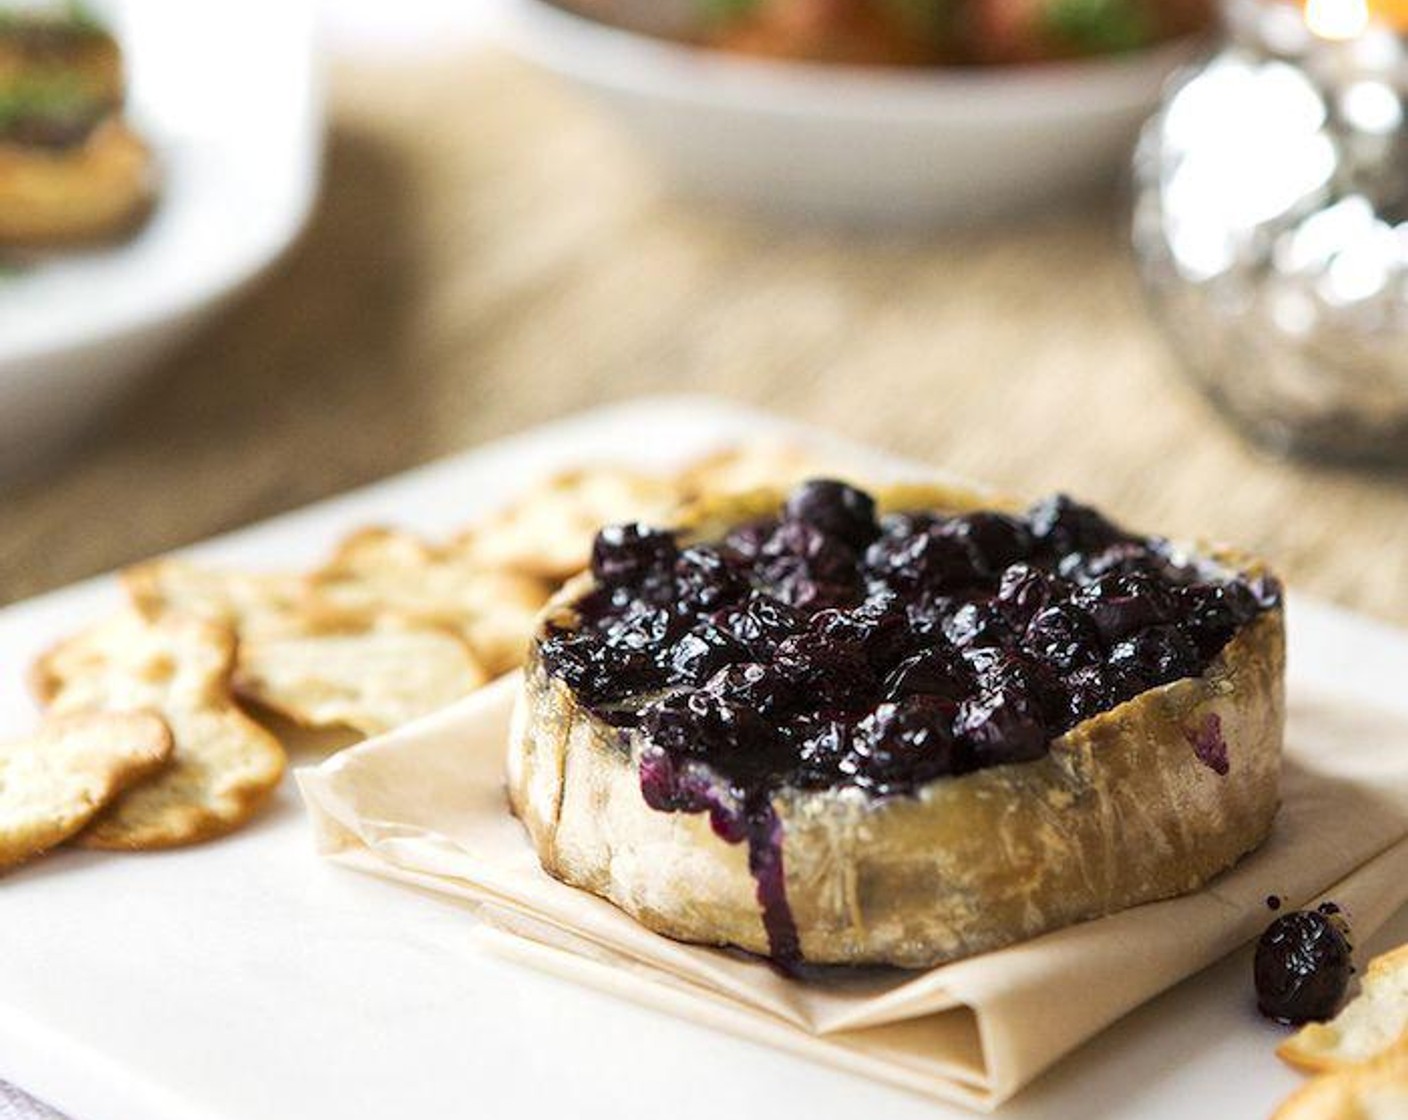 Baked Brie with Wine-Soaked Blueberries